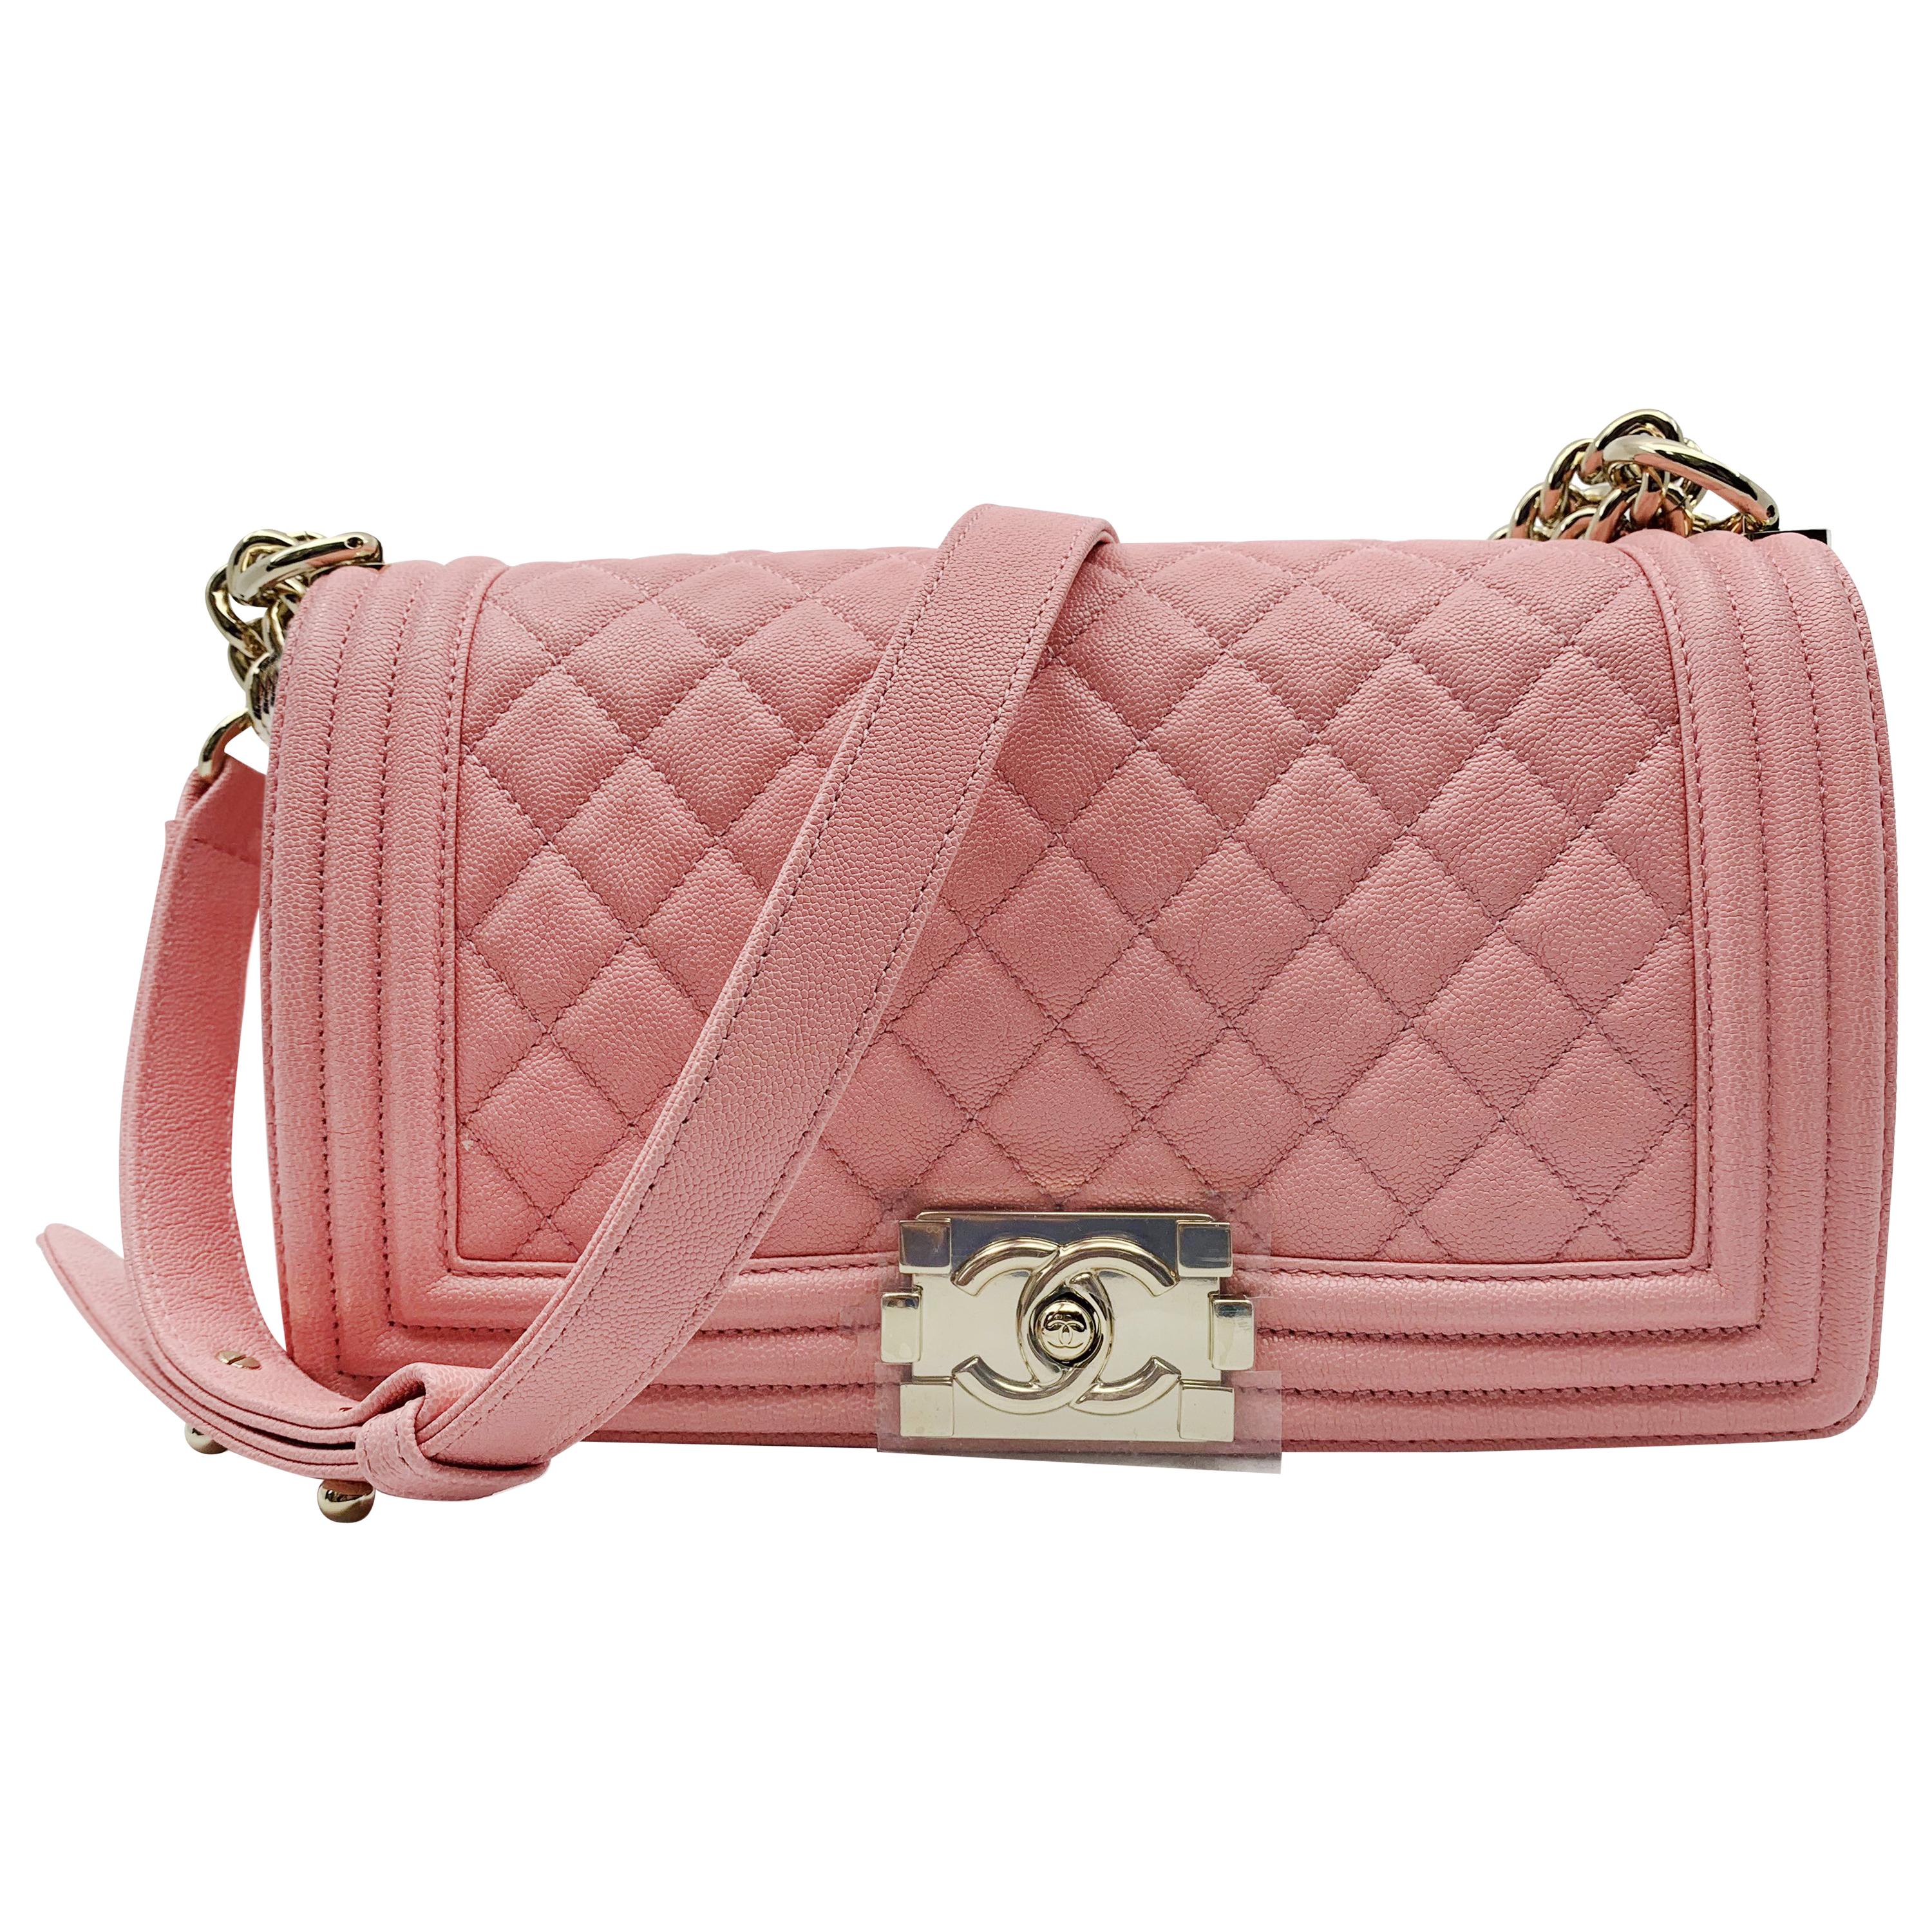 Chanel Boy on Chain Grained Calfskin Gold Tone Pink Bag 